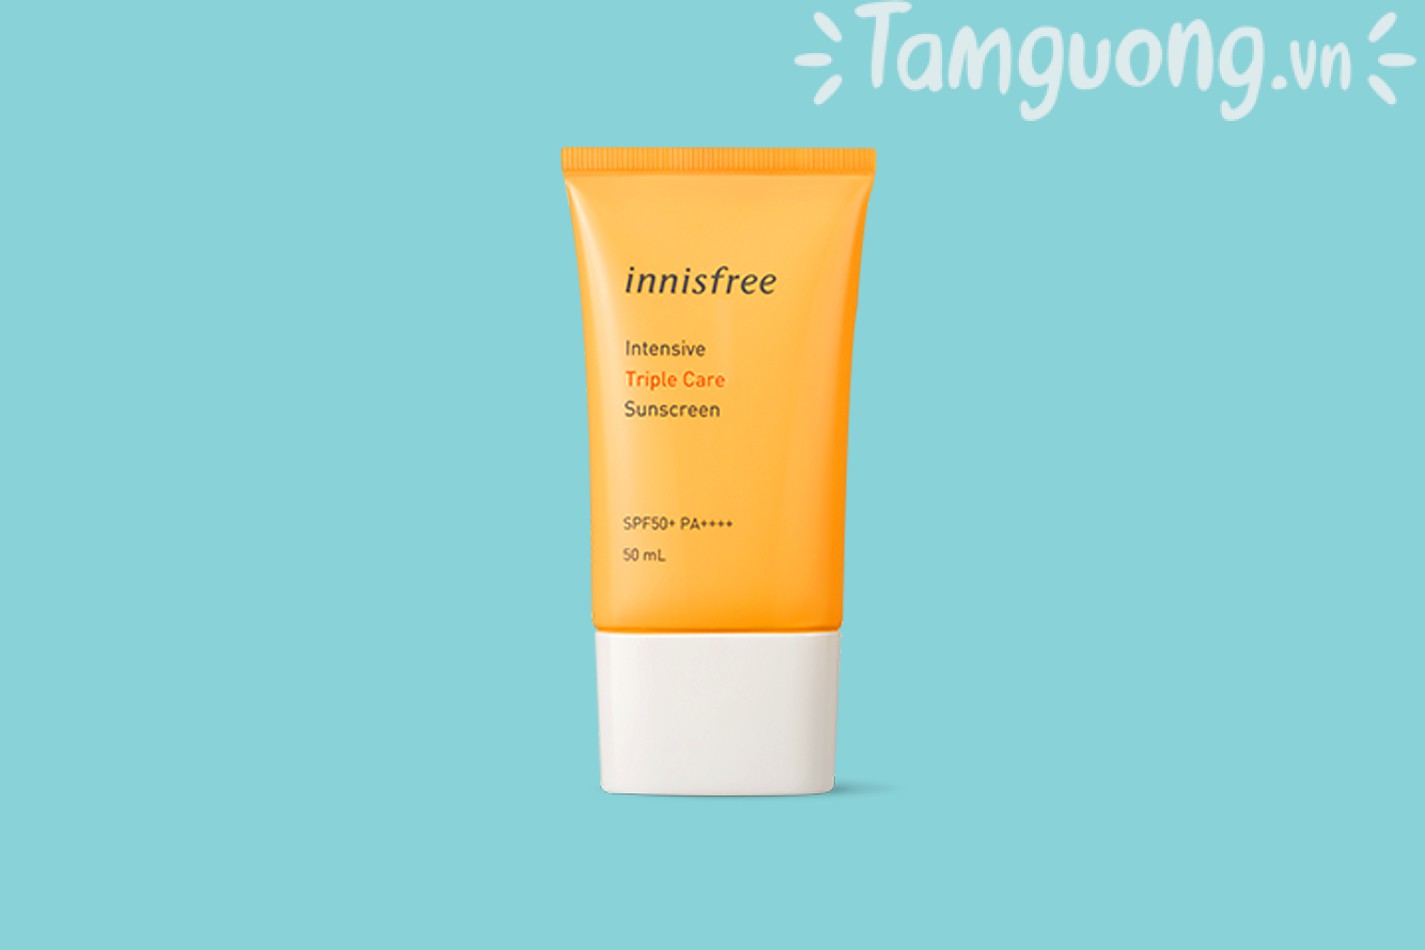 Kem chống nắng Innisfree triple care